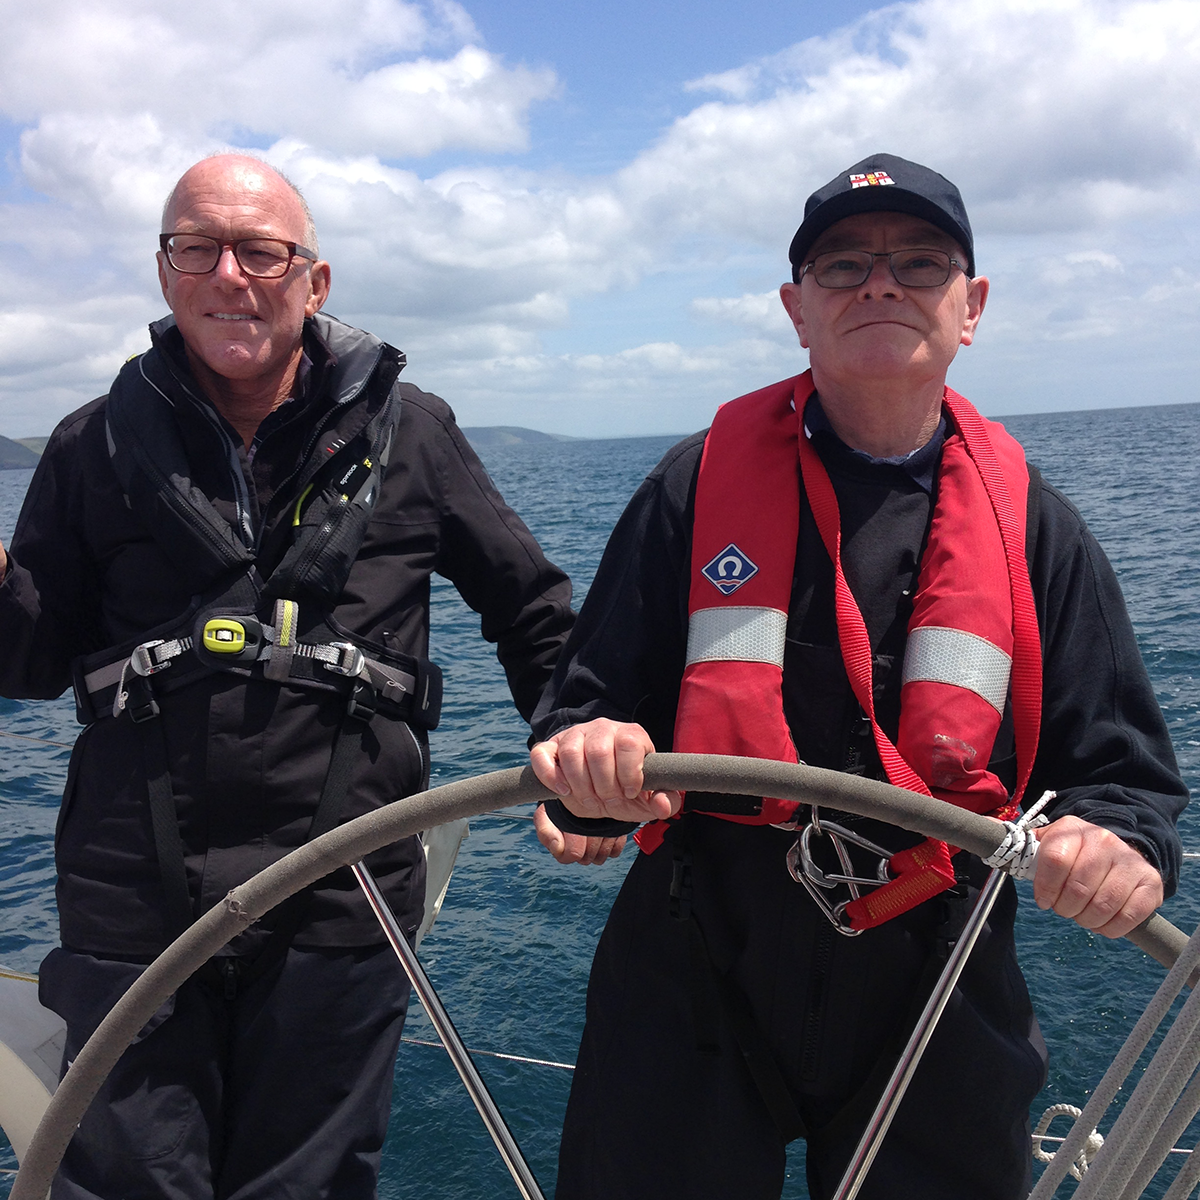 A picture of a sighted male skipper standing next to a male VI sailor who has the wheel. The sea is calm.